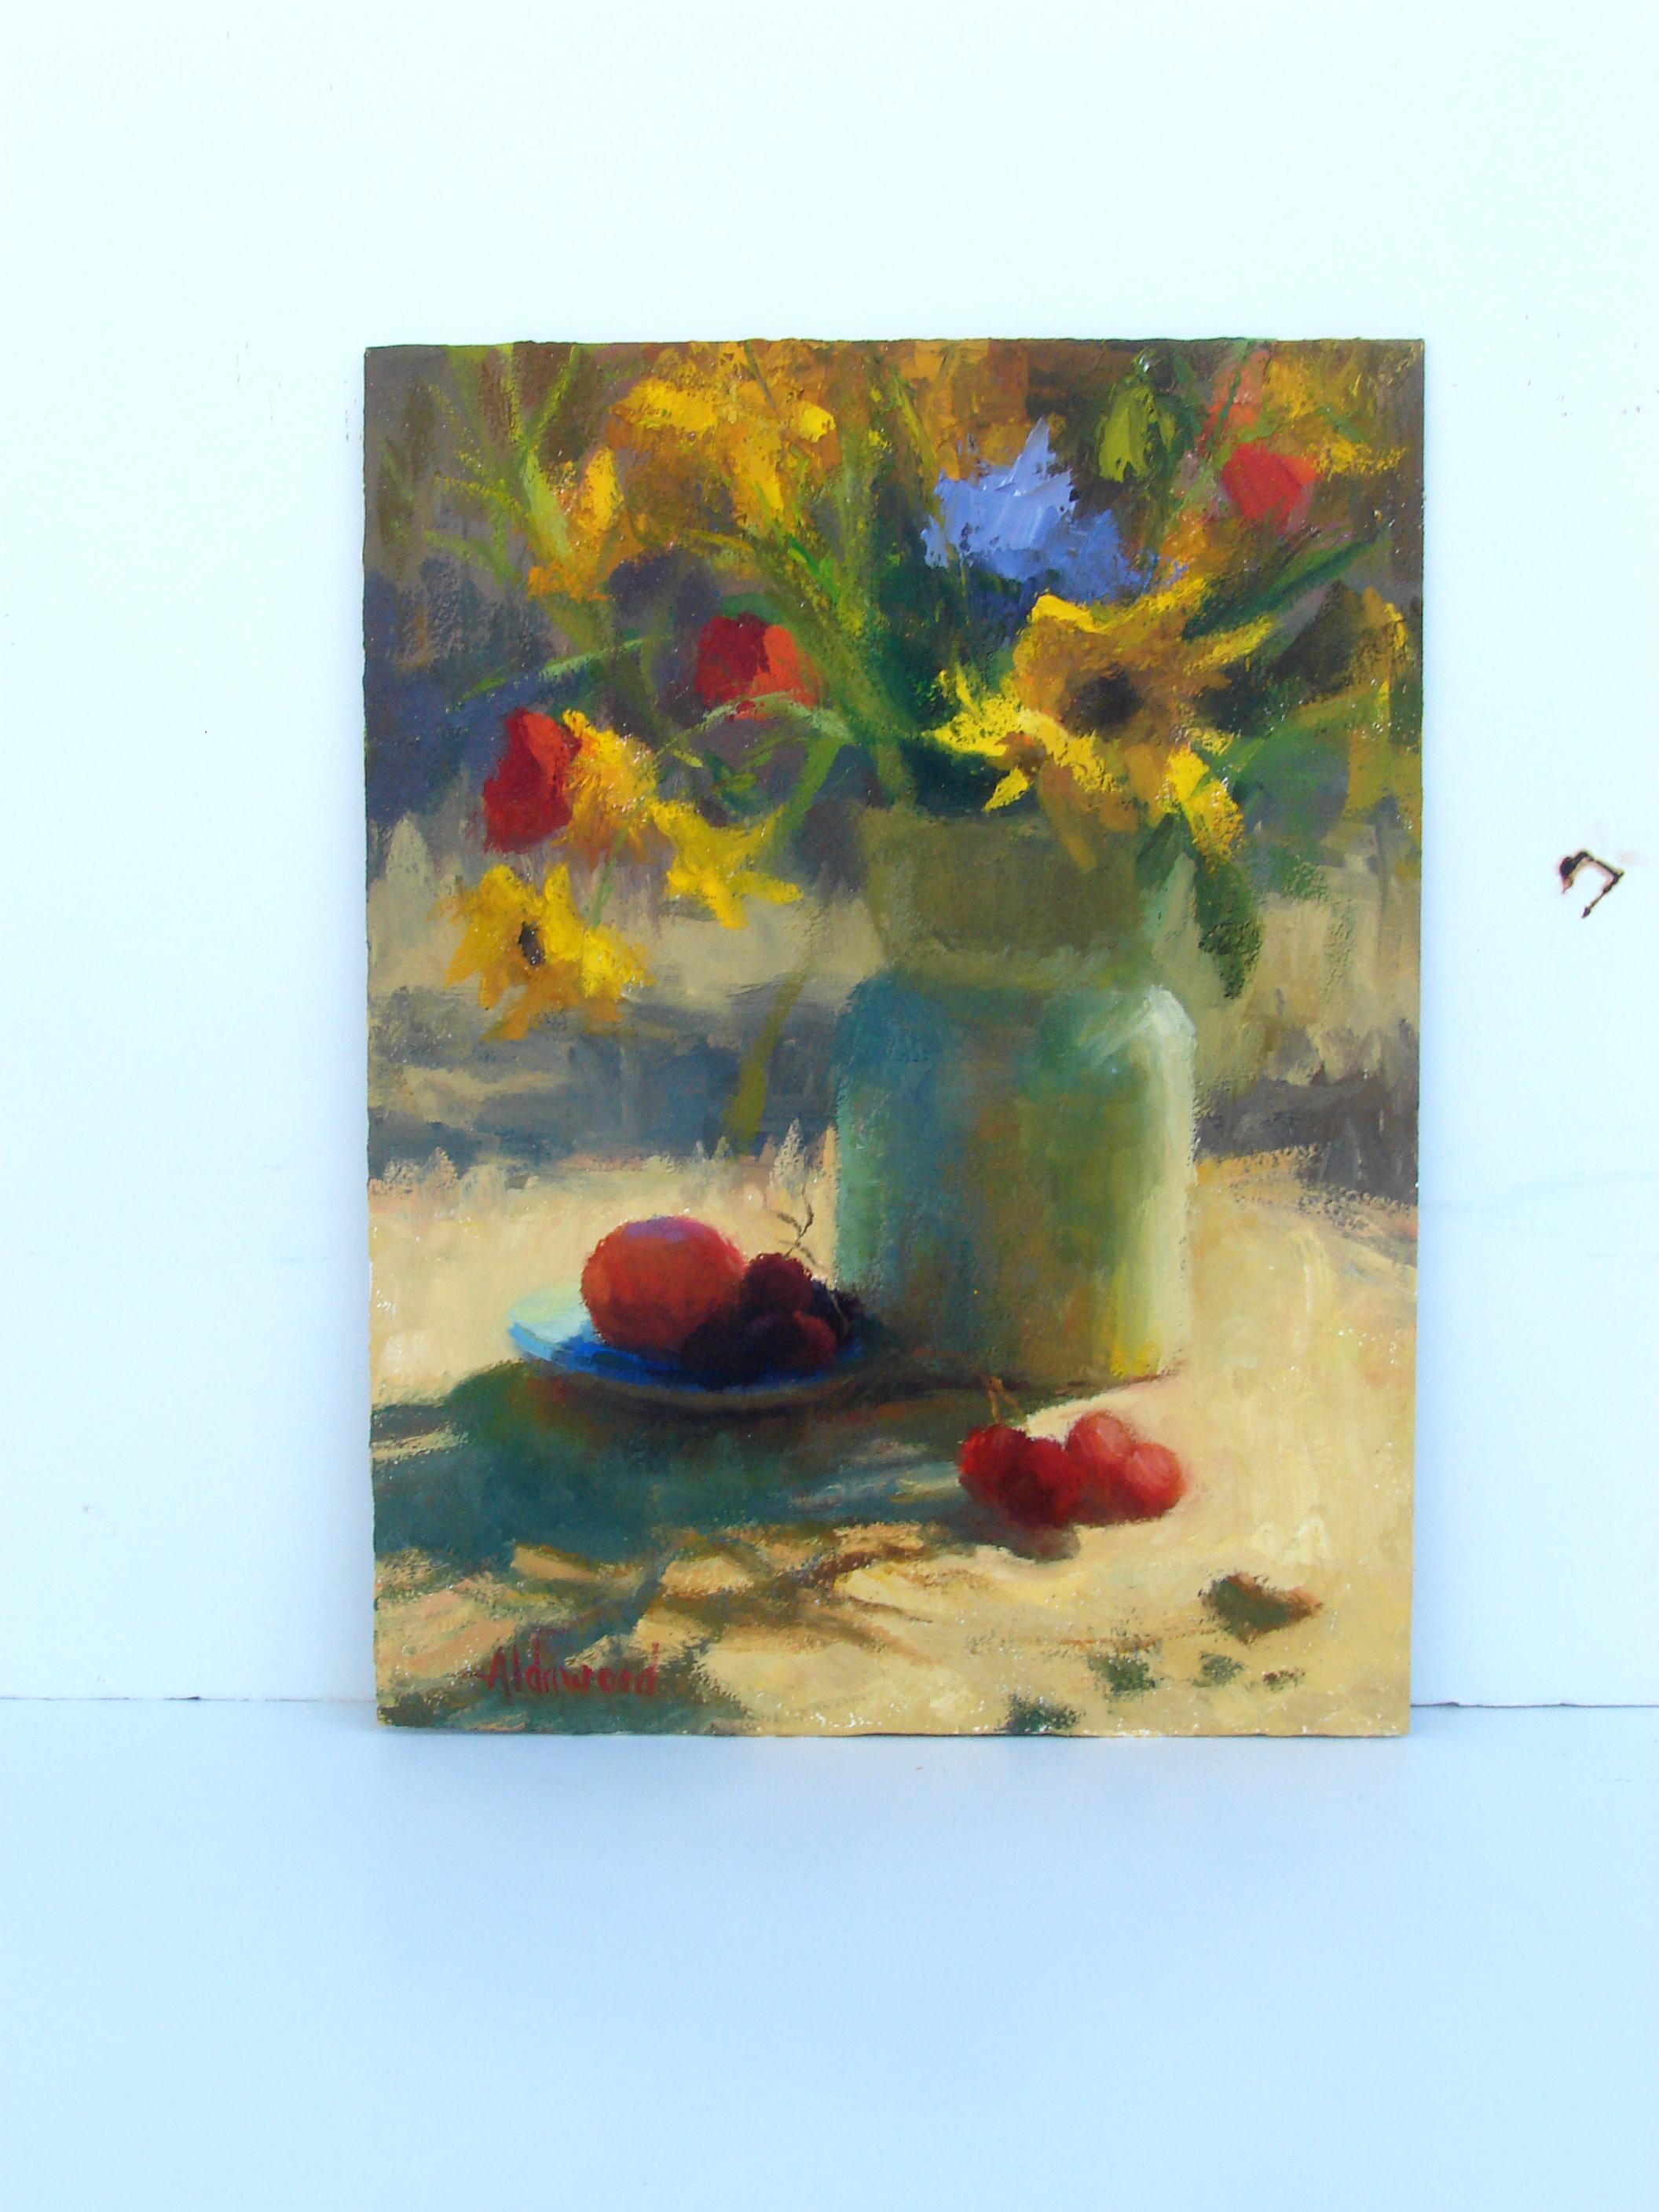 <p>Artist Comments<br>Artist Sherri Aldawood presents an impressionist still life of vibrant sunflowers and a few pickings of fruit. The subjects bask in the afternoon light, casting elongated shadows on the surface. 